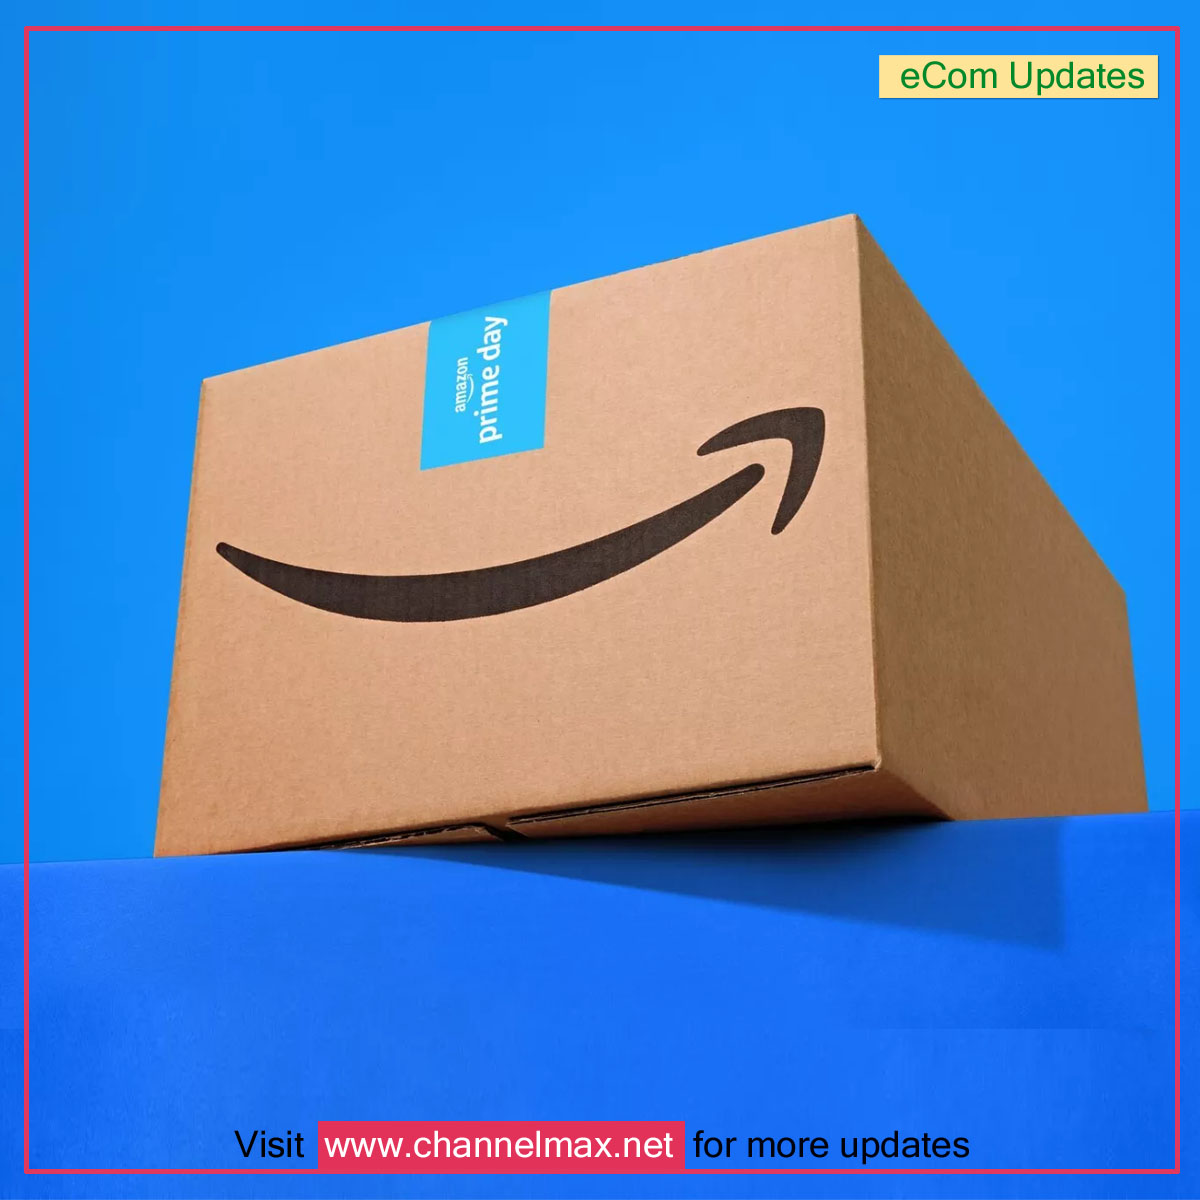 Amazon Confirms 10th Prime Day Sale in July, Dates Kept Secret
Link: channelmax.net/article/amazon…
.
.
.
#amazon #ecommerce #primeday #primeday2024 #announcement #update #news #breaking #viral #amazonprime #channelmax #repricer #saas #repricing